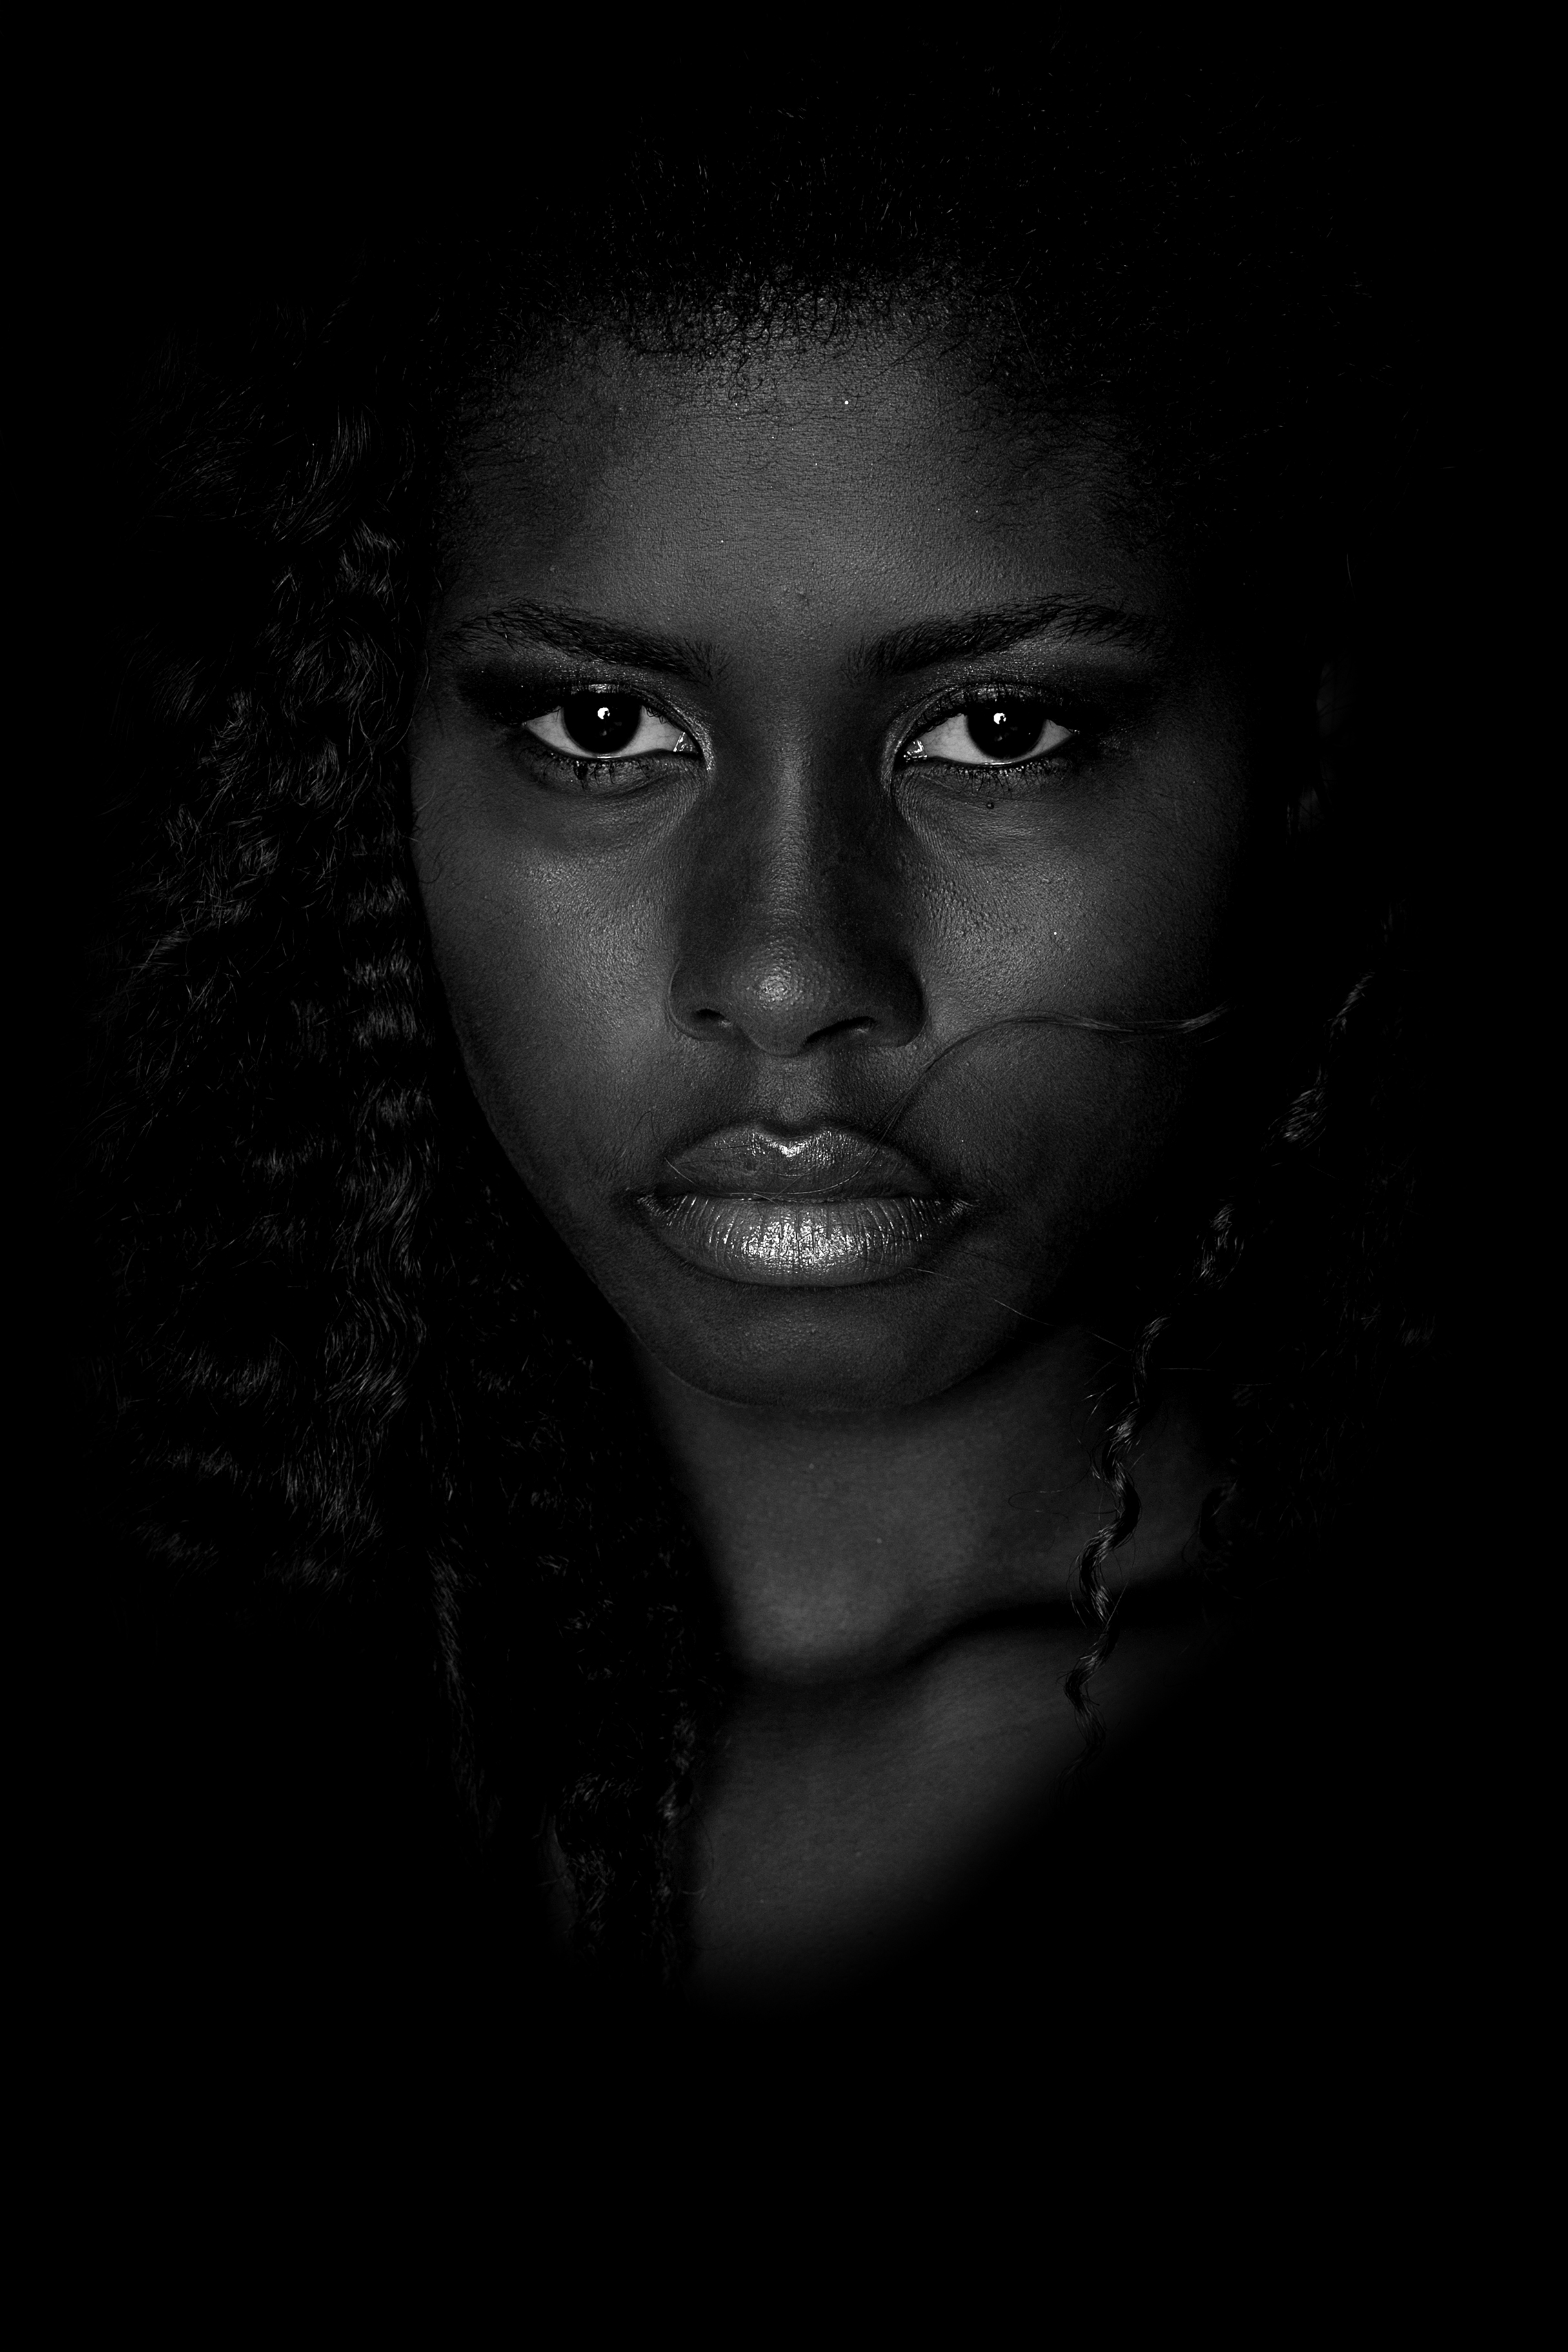 A girl's face in a black and white photo.